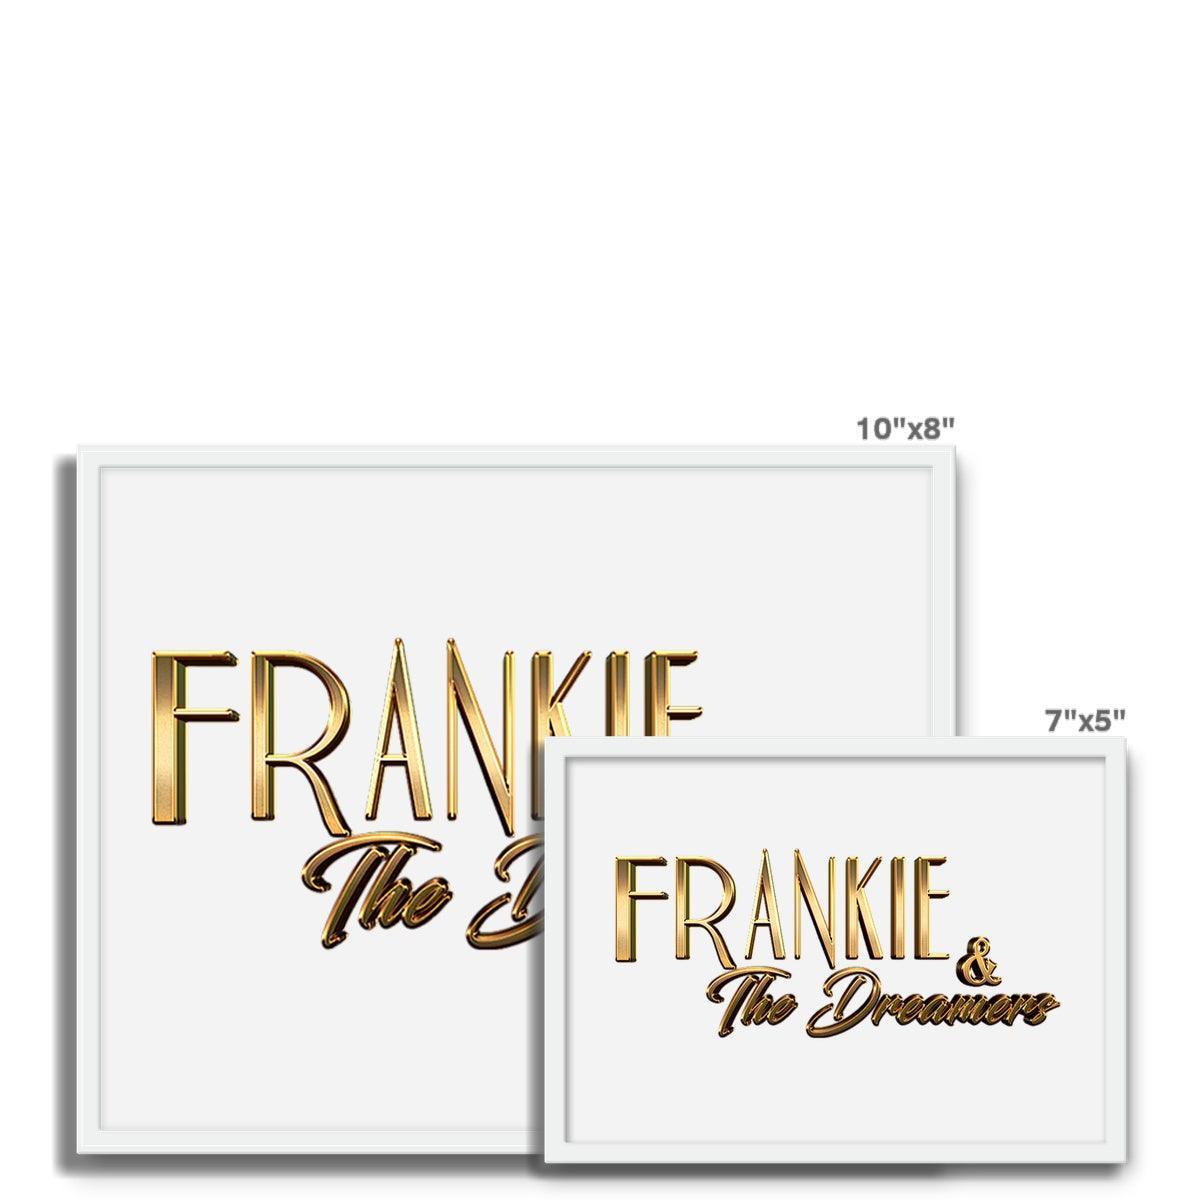 Frankie And The Dreamers Framed Photo Tile | Art Prints